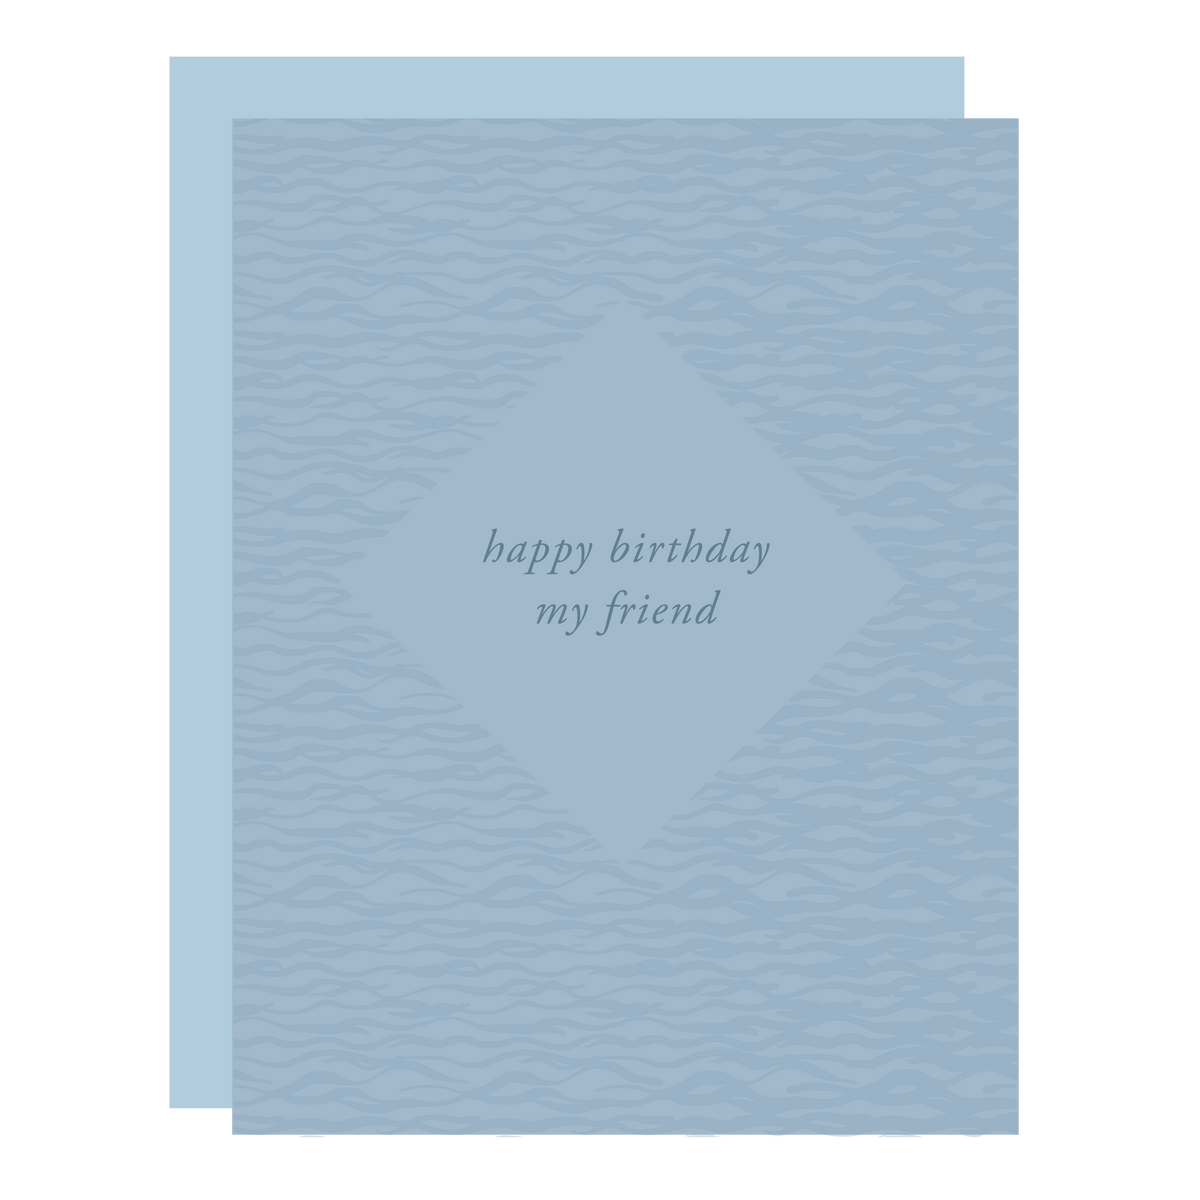 &quot;Happy Birthday My Friend&quot; birthday card, letterpress printed by hand on steel blue paper.